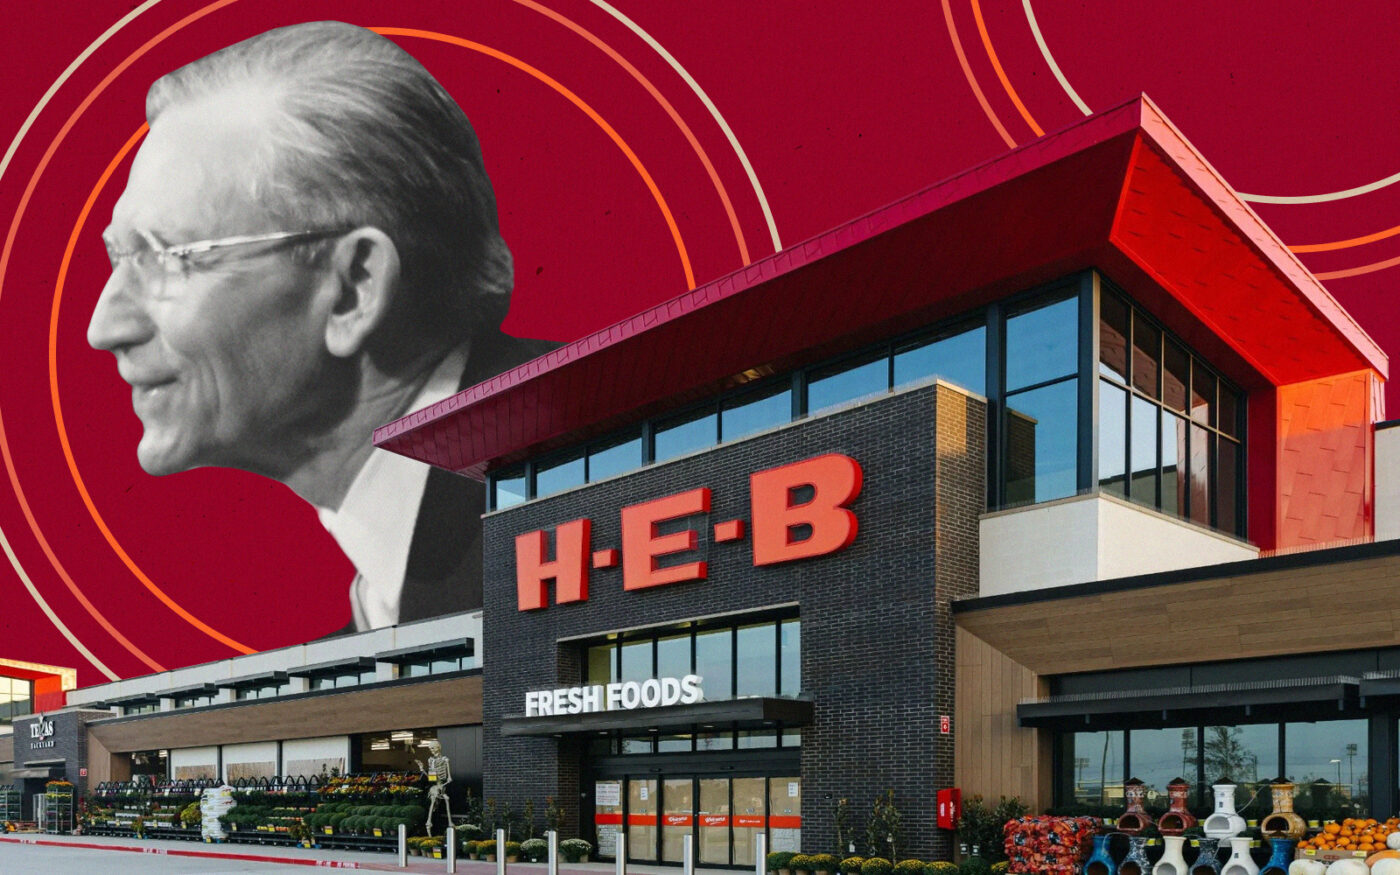 H-E-B Buys 21 Acres in North Texas Town Celina